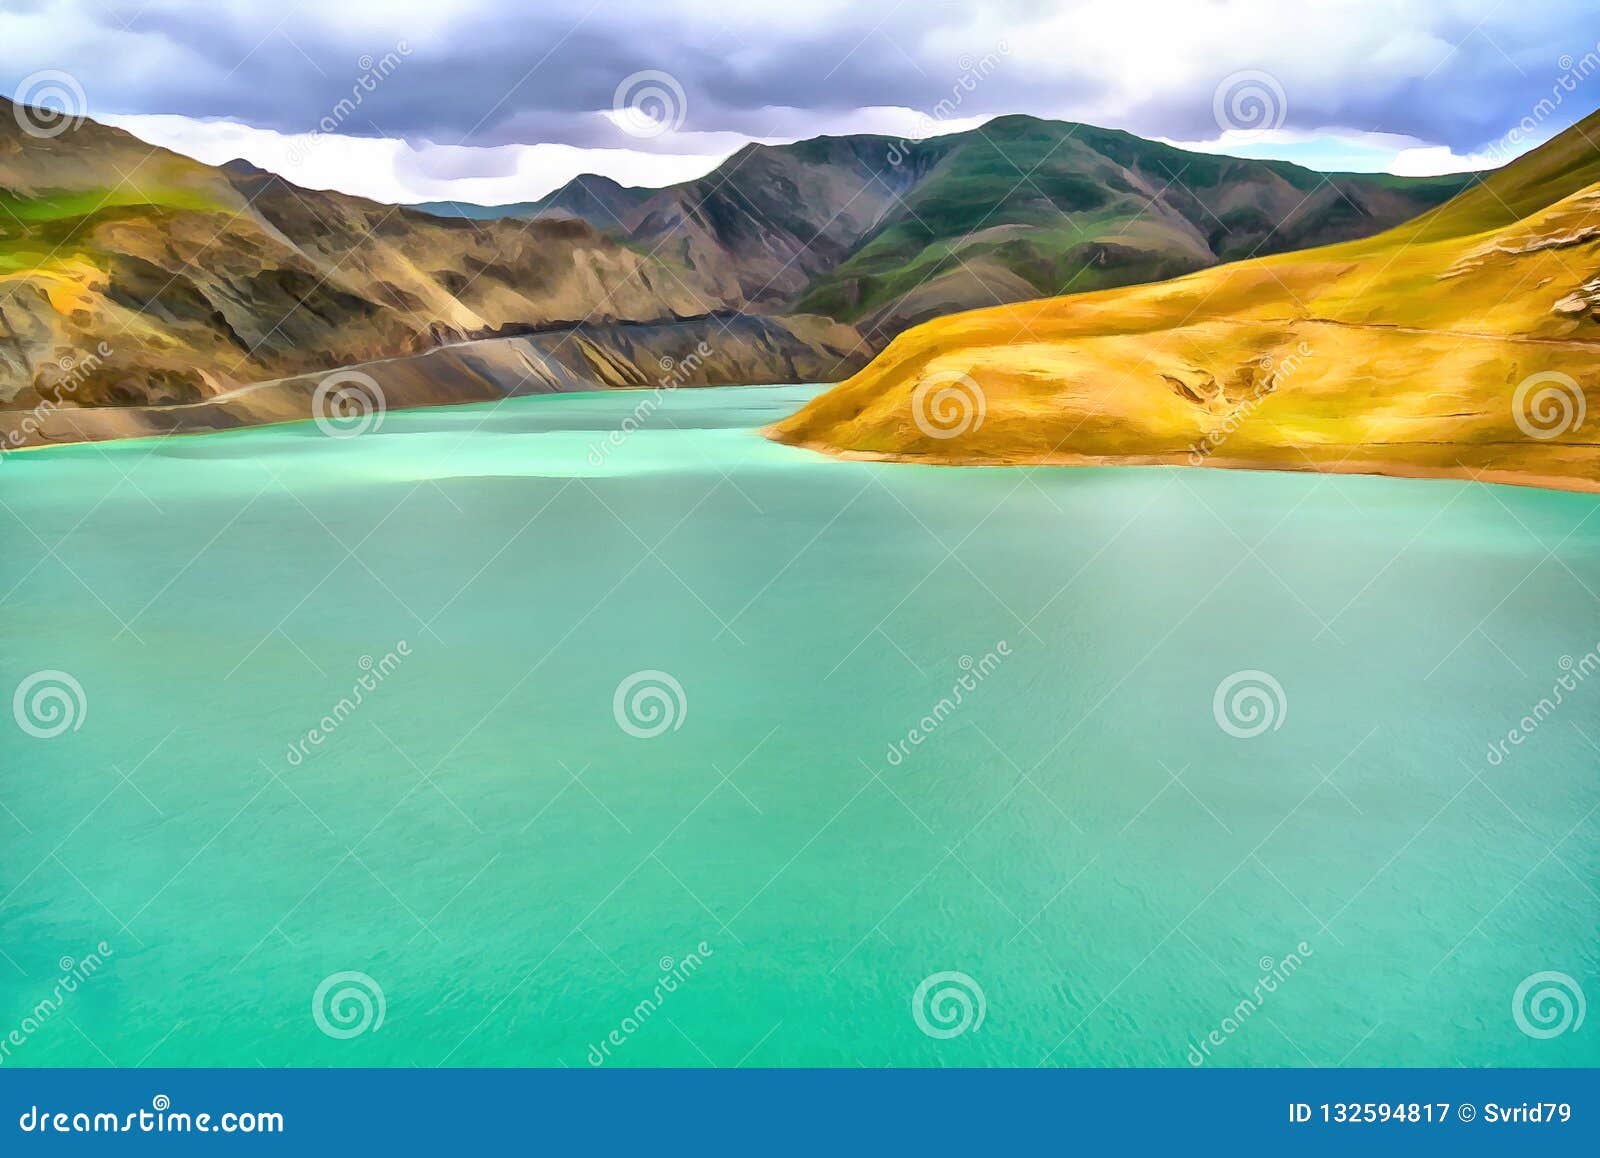 3 974 Watercolor Mountain Landscape Photos Free Royalty Free Stock Photos From Dreamstime We only need a few guidelines in order to mark the mountain range and the foreground hills. https www dreamstime com drawing watercolor mountain landscape digital painting alpine early spring himalayas tibet image132594817